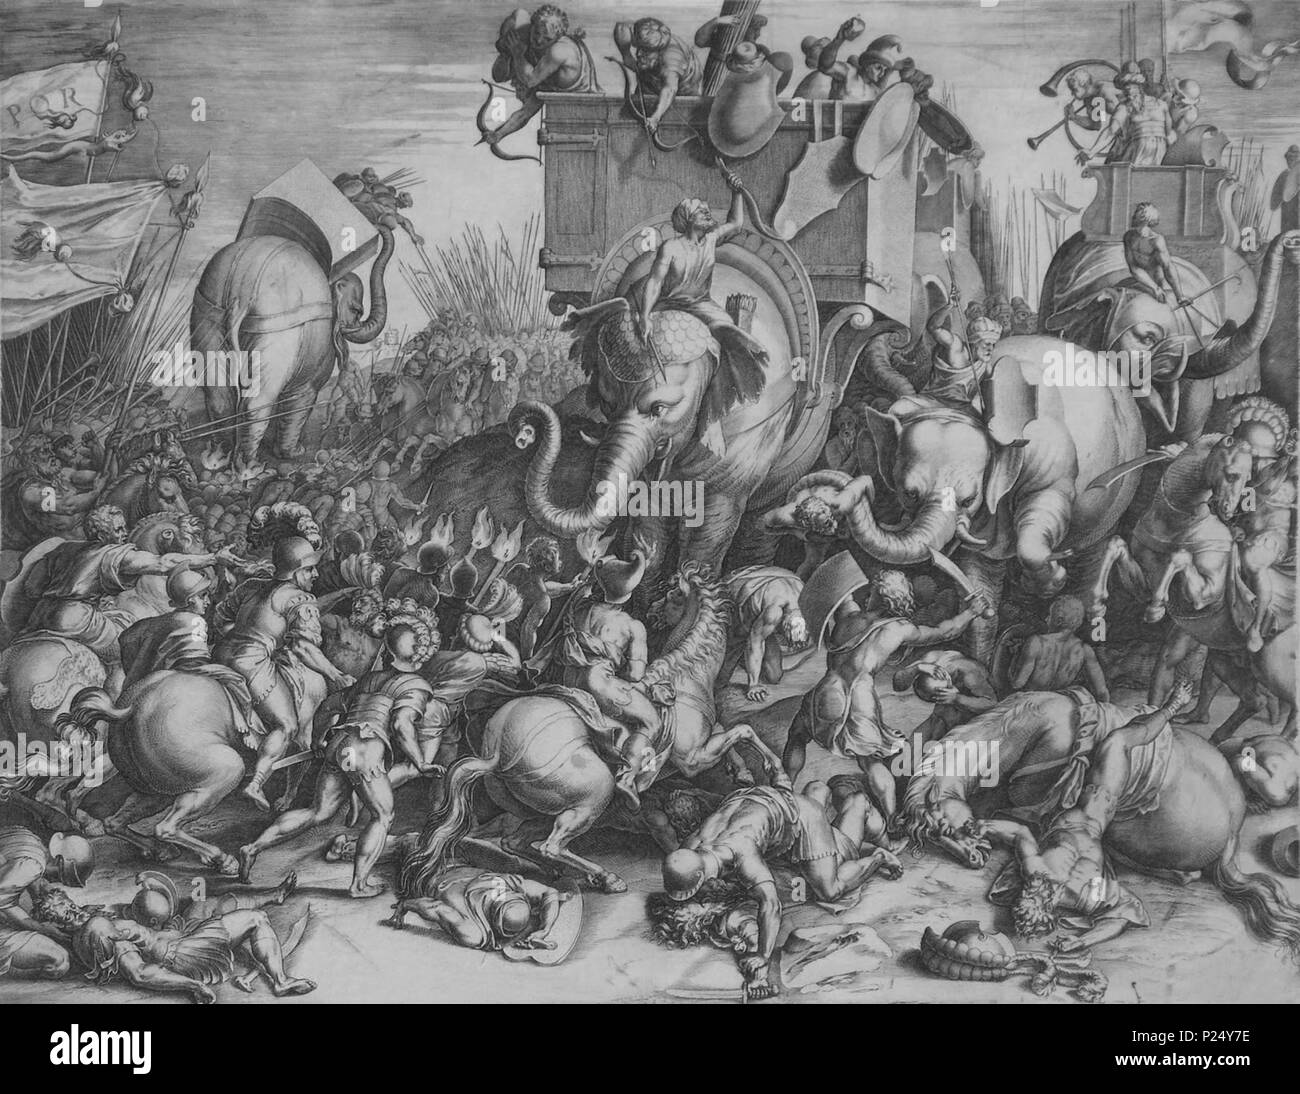 Hannical Barca at the Battle of Zama. He was a Carthaginian general, considered one of the greatest military commanders in history. He is seen here in a 1567 engraving by Cornelius Cort. Public domain image by virture of age. The Battle of Zama—fought in 202 BC near Zama (Tunisia)—marked the end of the Second Punic War. A Roman army led by Publius Cornelius Scipio Africanus (Scipio), with crucial support from Numidian leader Masinissa, defeated the Carthaginian army led by Hannibal. Stock Photo